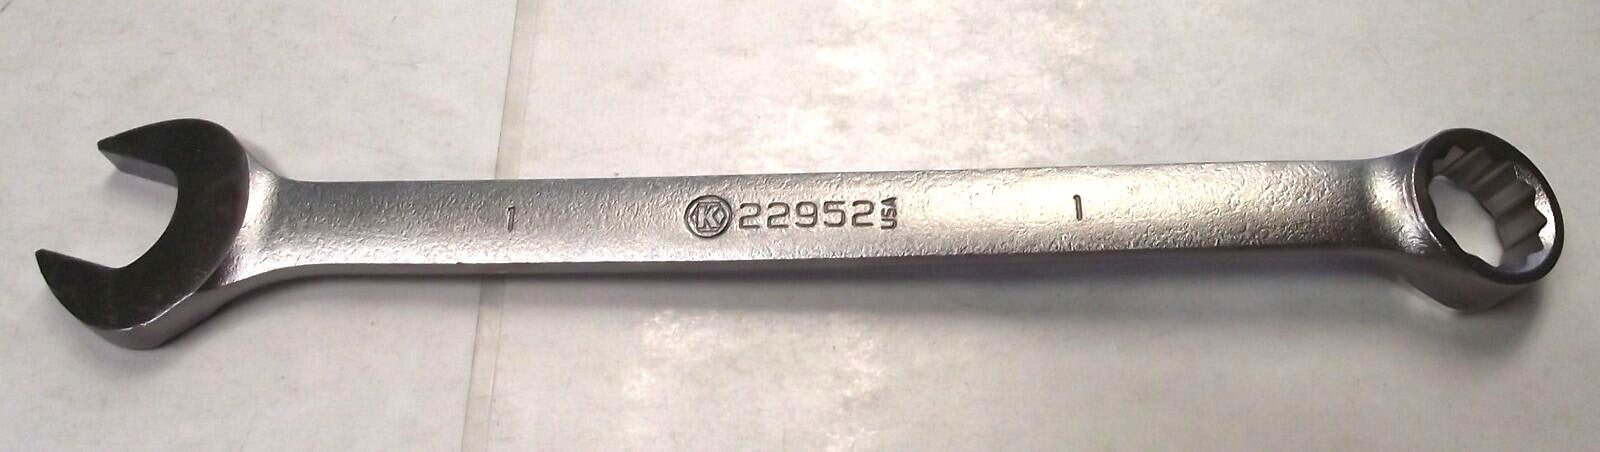 Kobalt 22952 1" Combination Wrench 12 Point USA